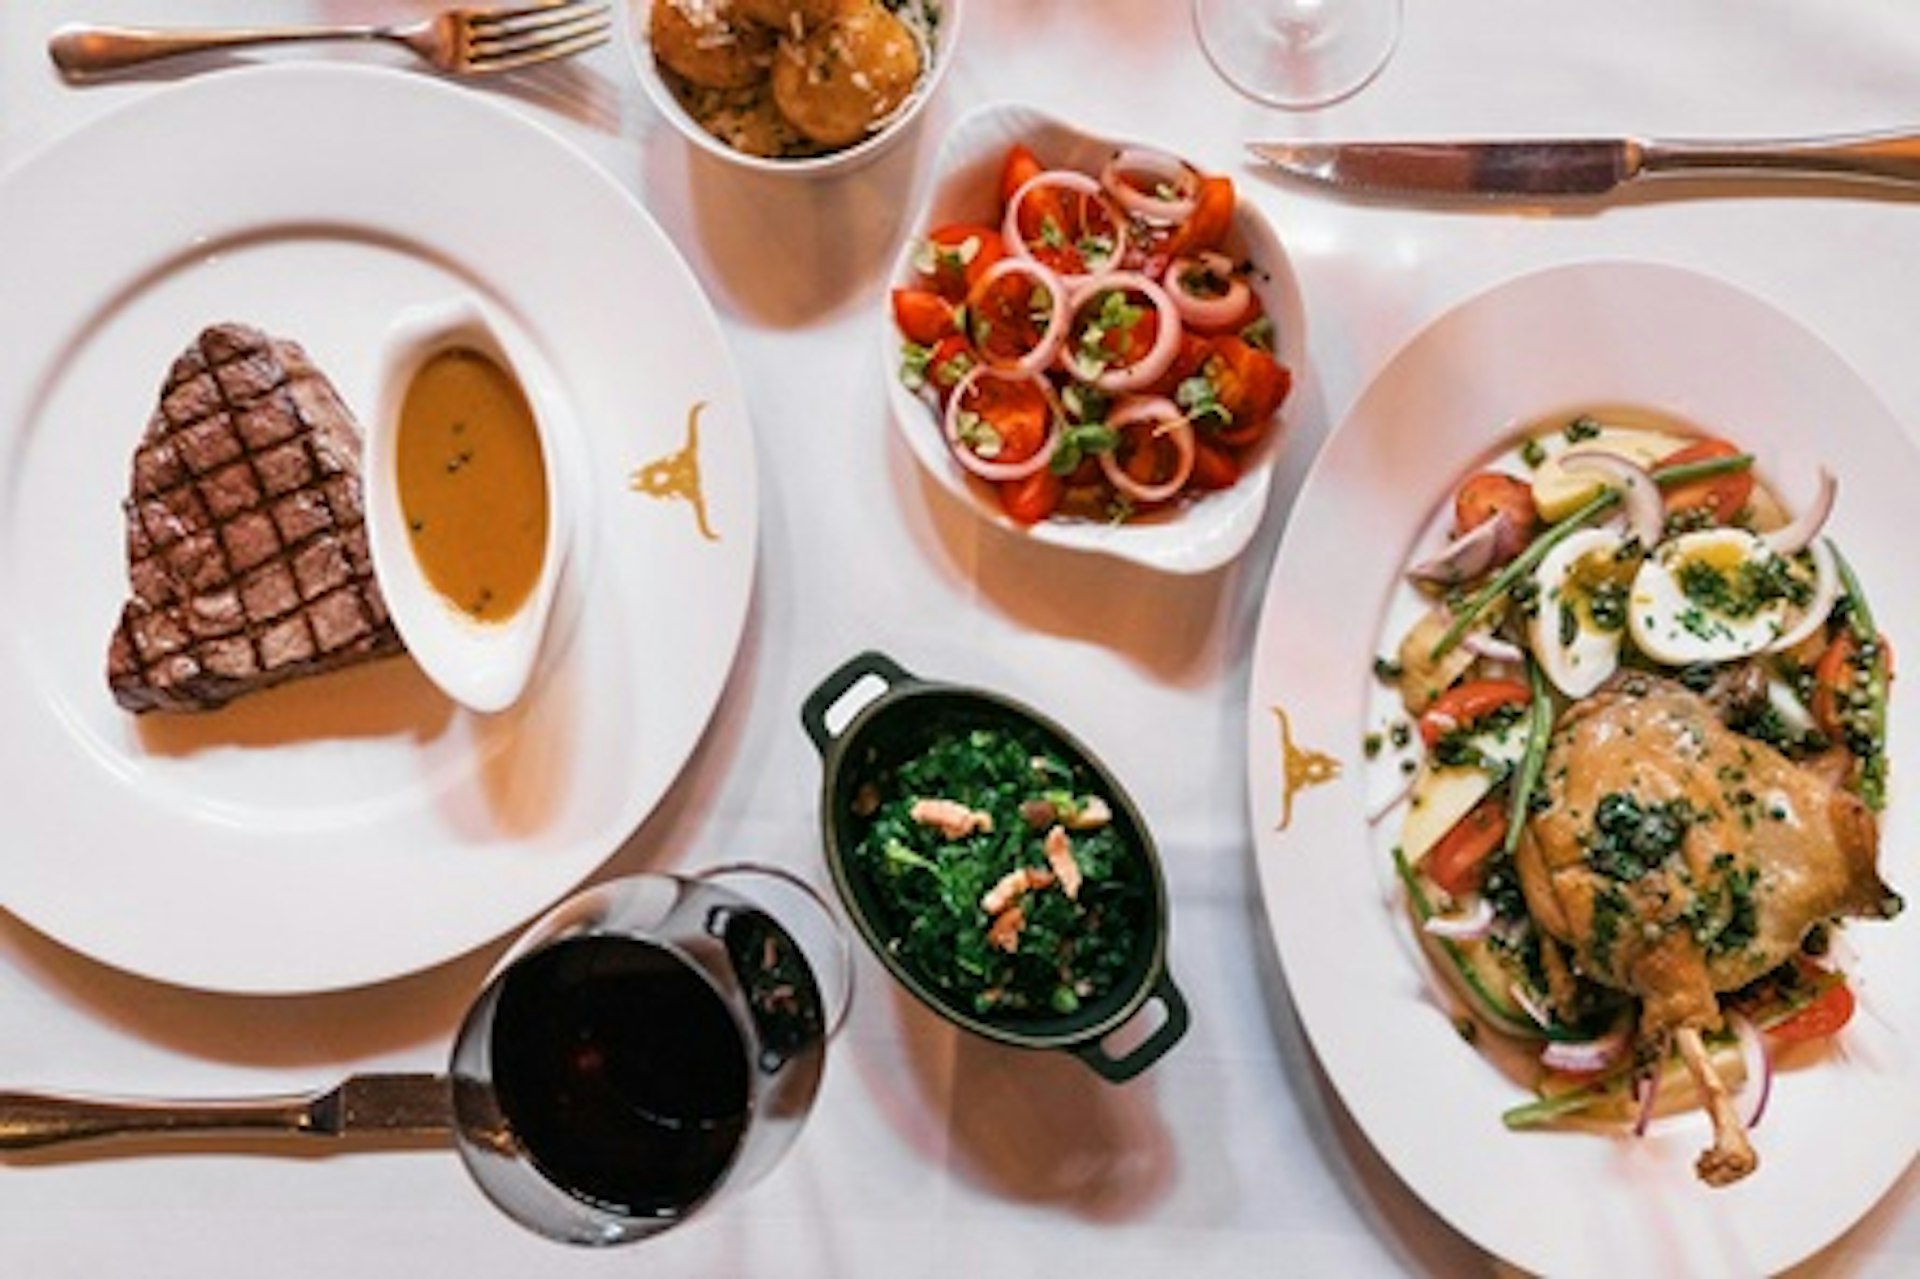 Thames Jet Boat Rush and Three Course Meal for Two at Marco Pierre White's London Steakhouse Co 2